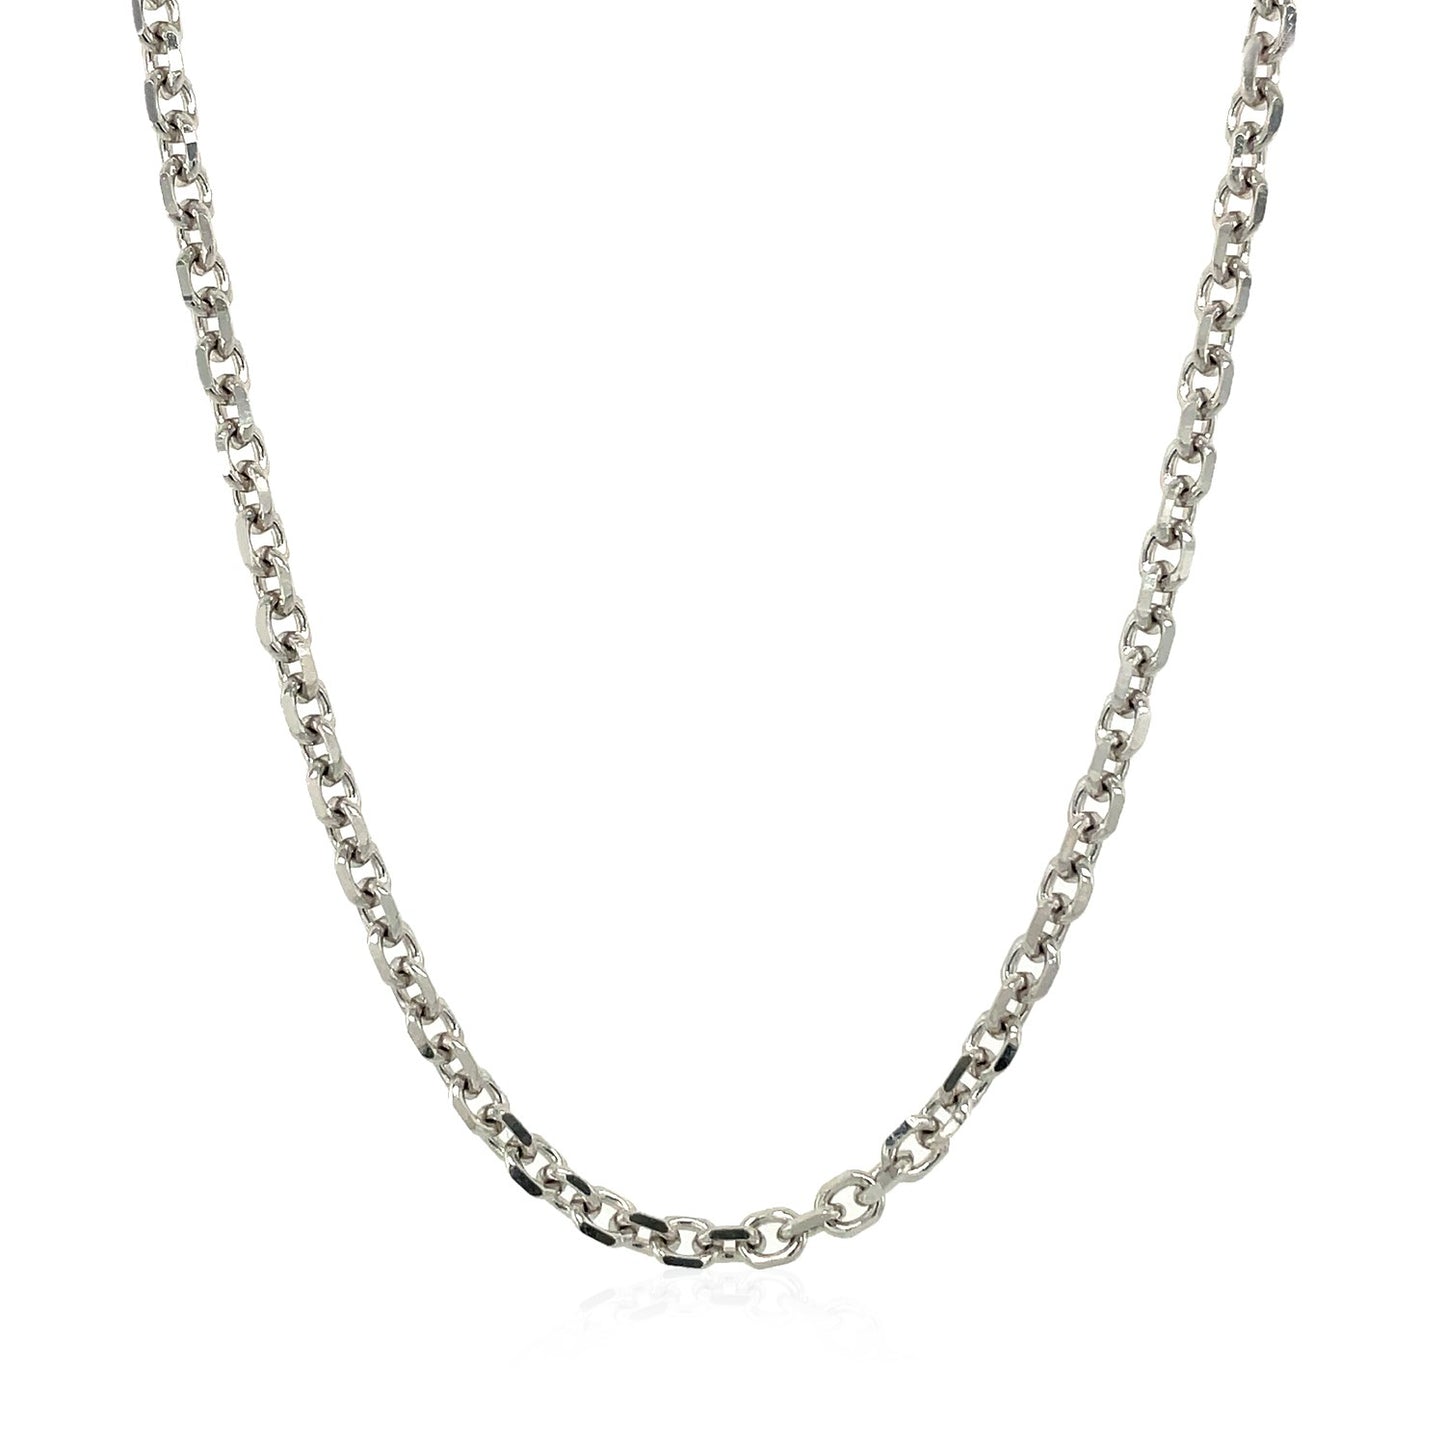 14k White Gold Diamond Cut Cable Link Chain (2.90 mm)